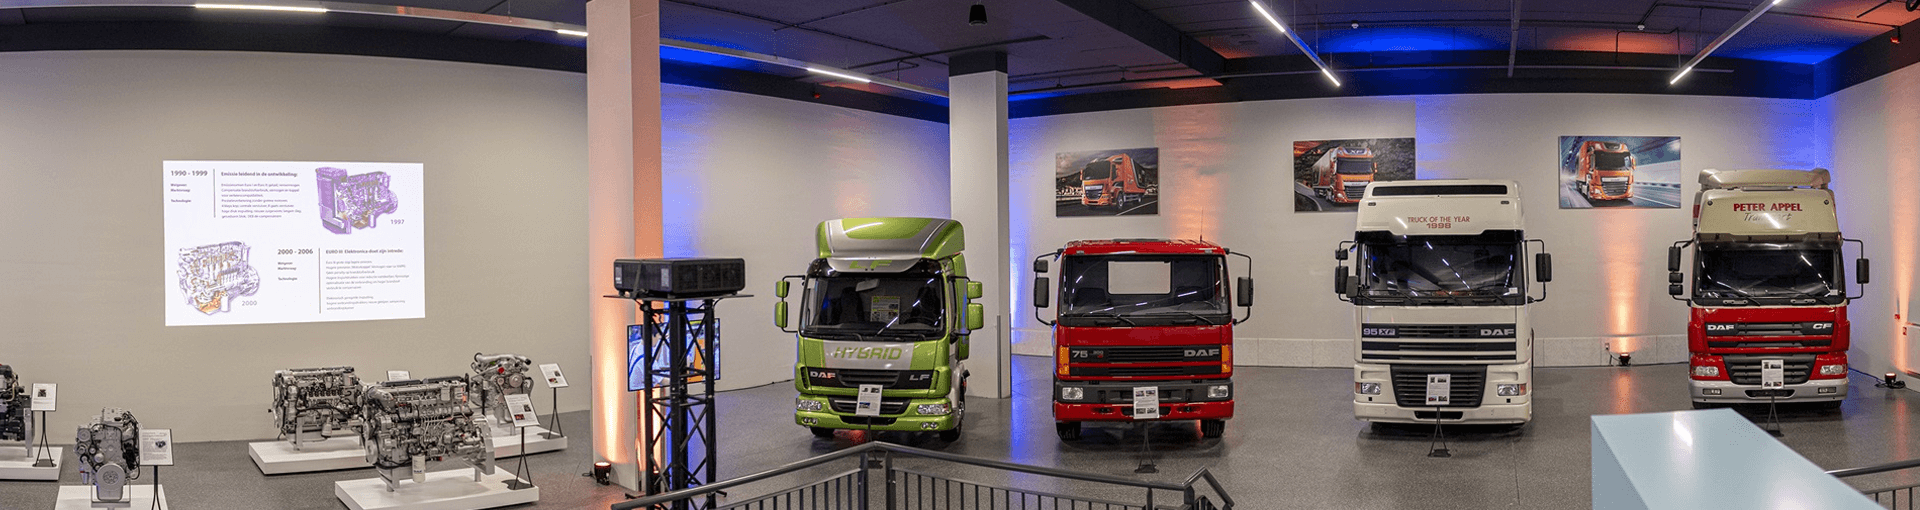 daf-museum-eindhoven